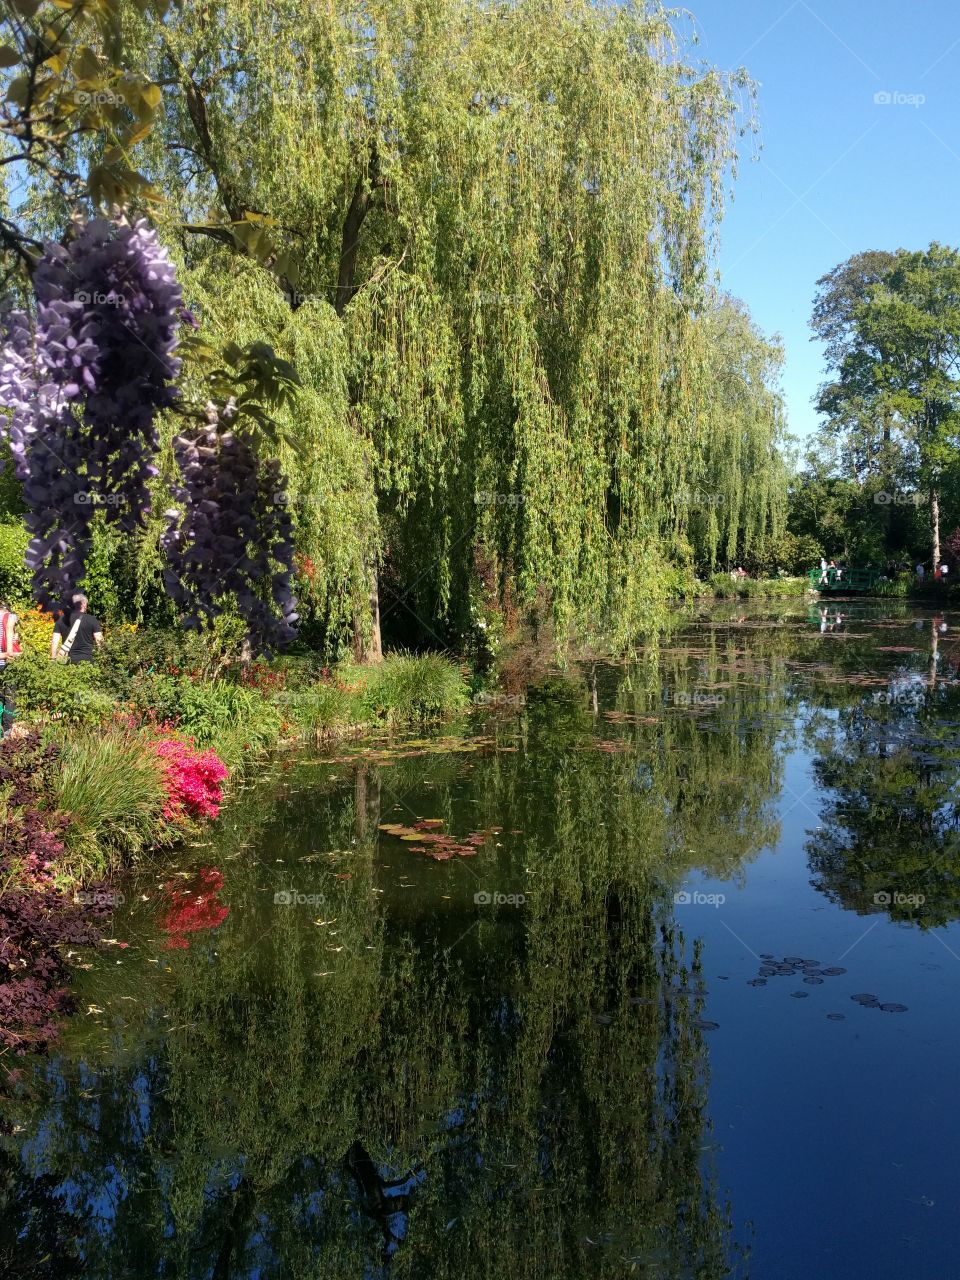 Monet's Garden in Giverny, France